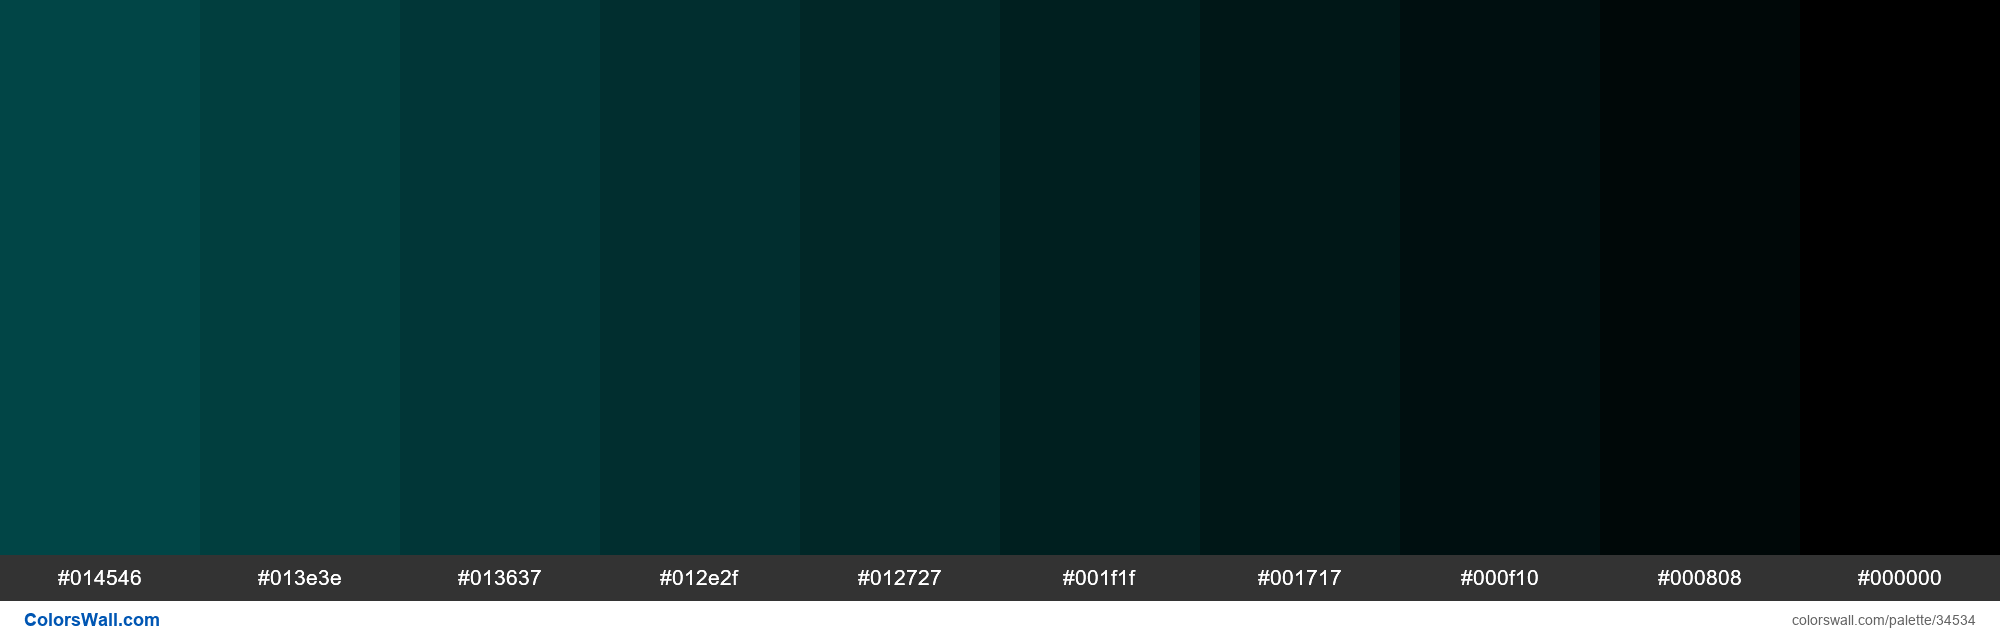 Shades Xkcd Color Dark Teal 014d4e Hex Hex Rgb Codes